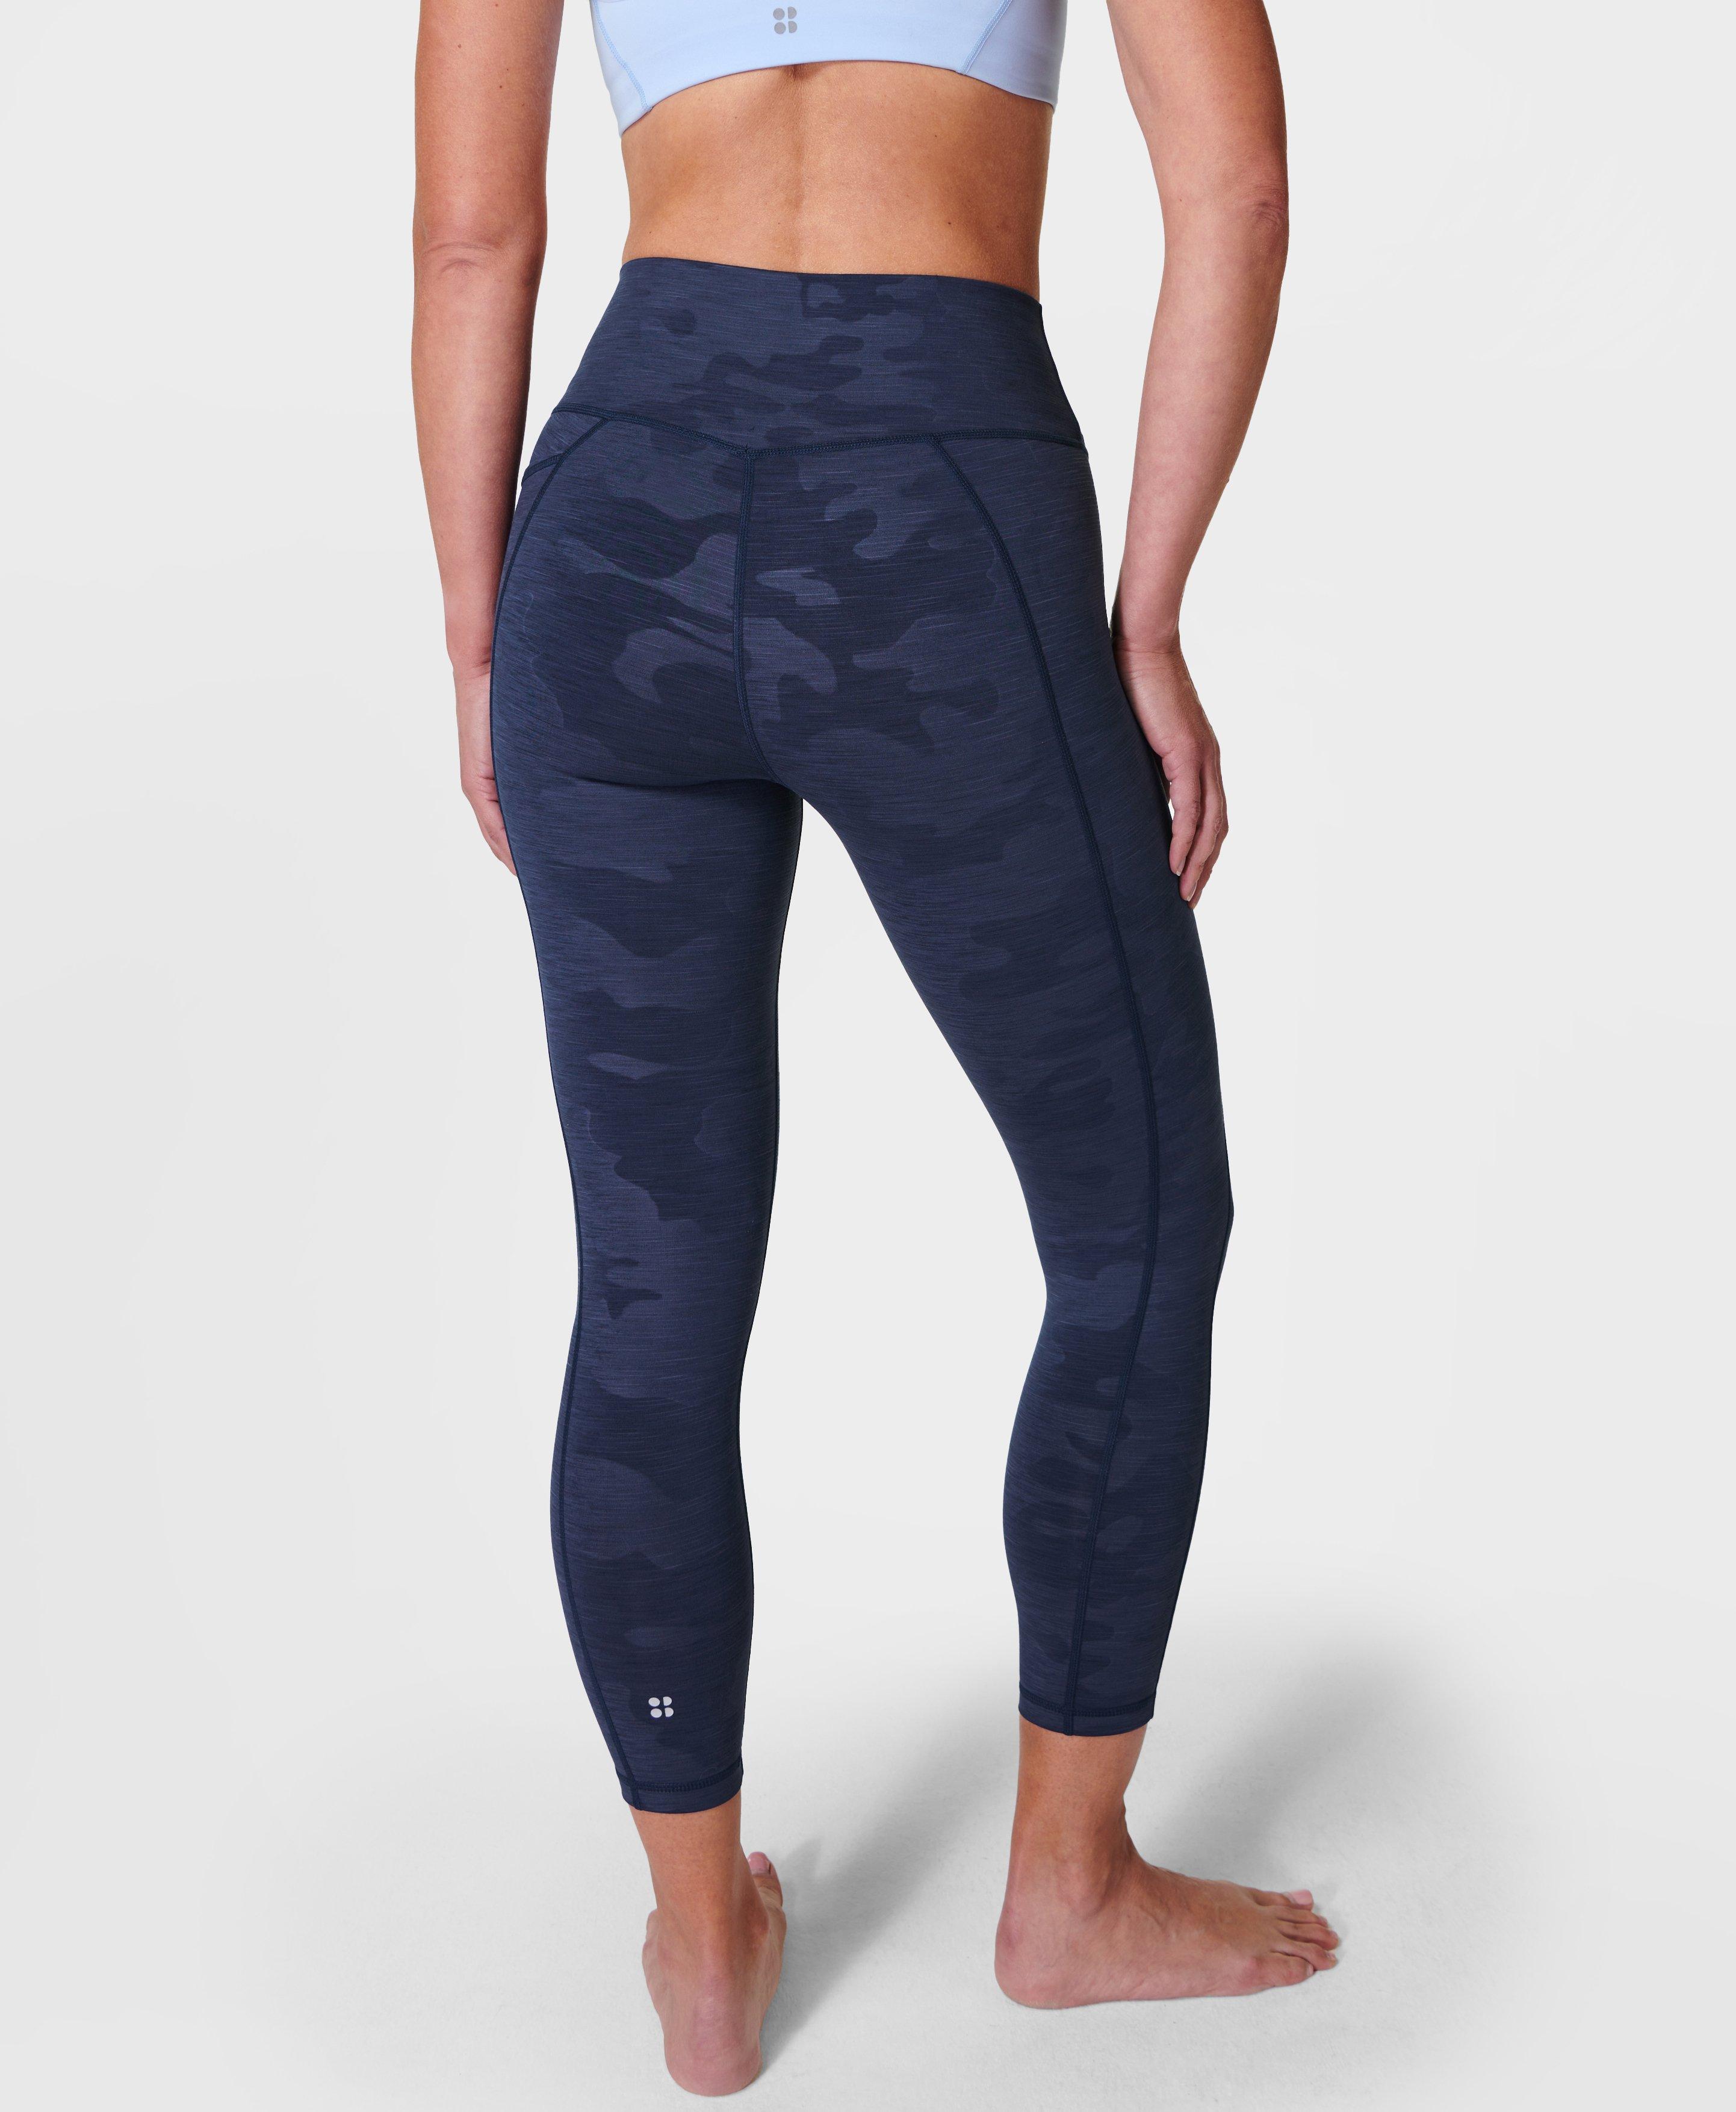 Sweaty Betty Super Sculpt Sustainable High-Waisted 7/8 Yoga